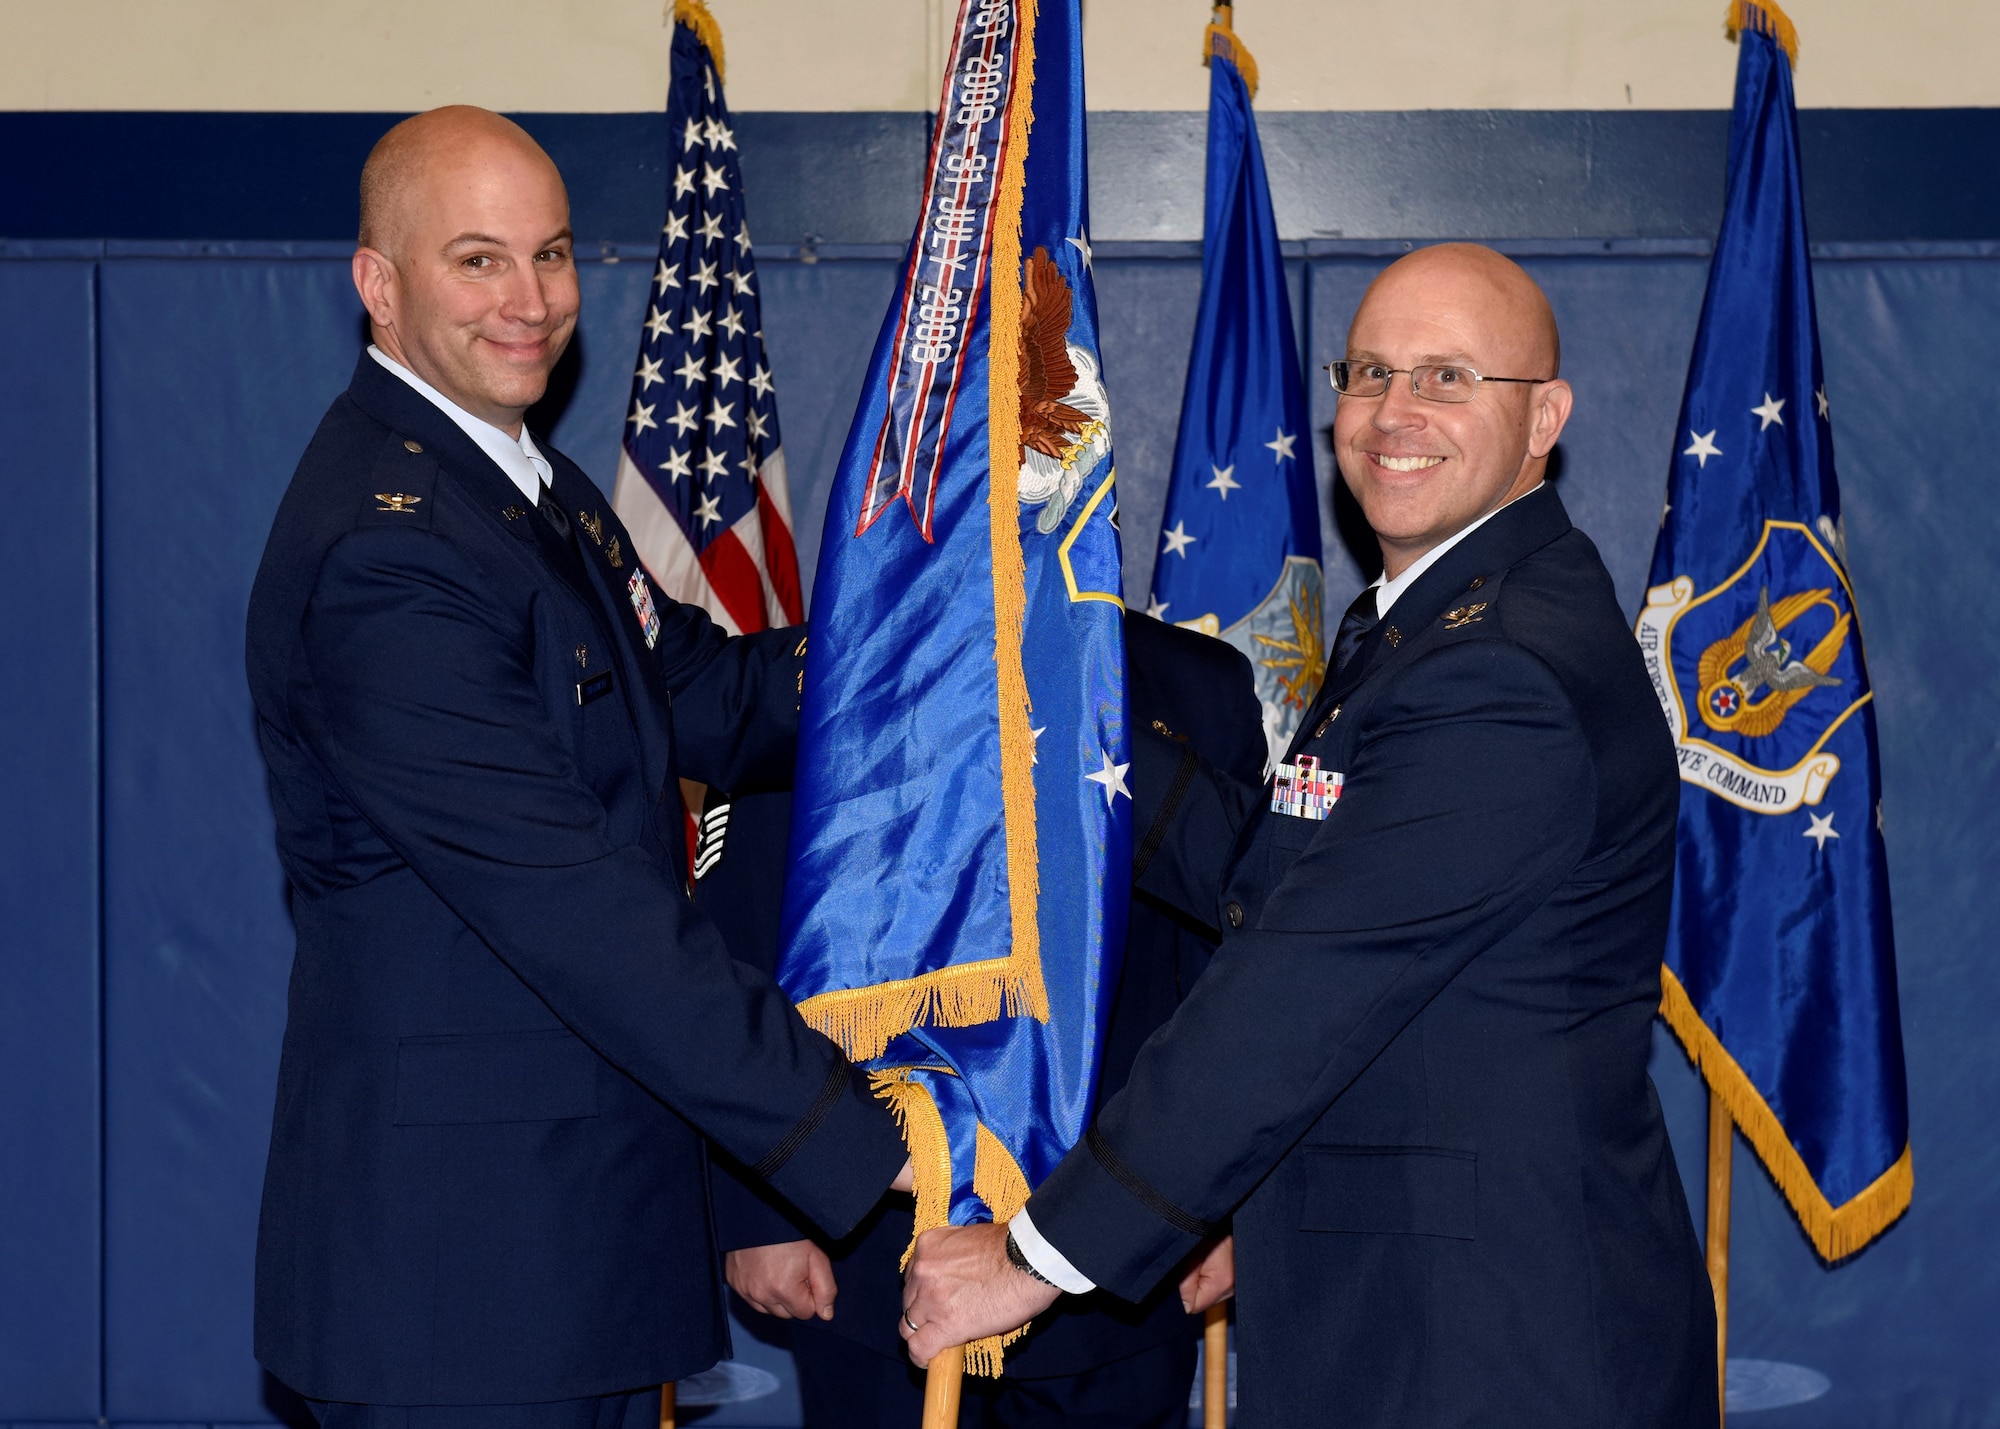 Col. Dean Sniegowski, 310th Space Wing commander, passes the 310th Operations Group guidon to Col. Leland Leonard, incoming 310th OG commander, during a change of command ceremony Saturday, Jan. 5th, 2019.